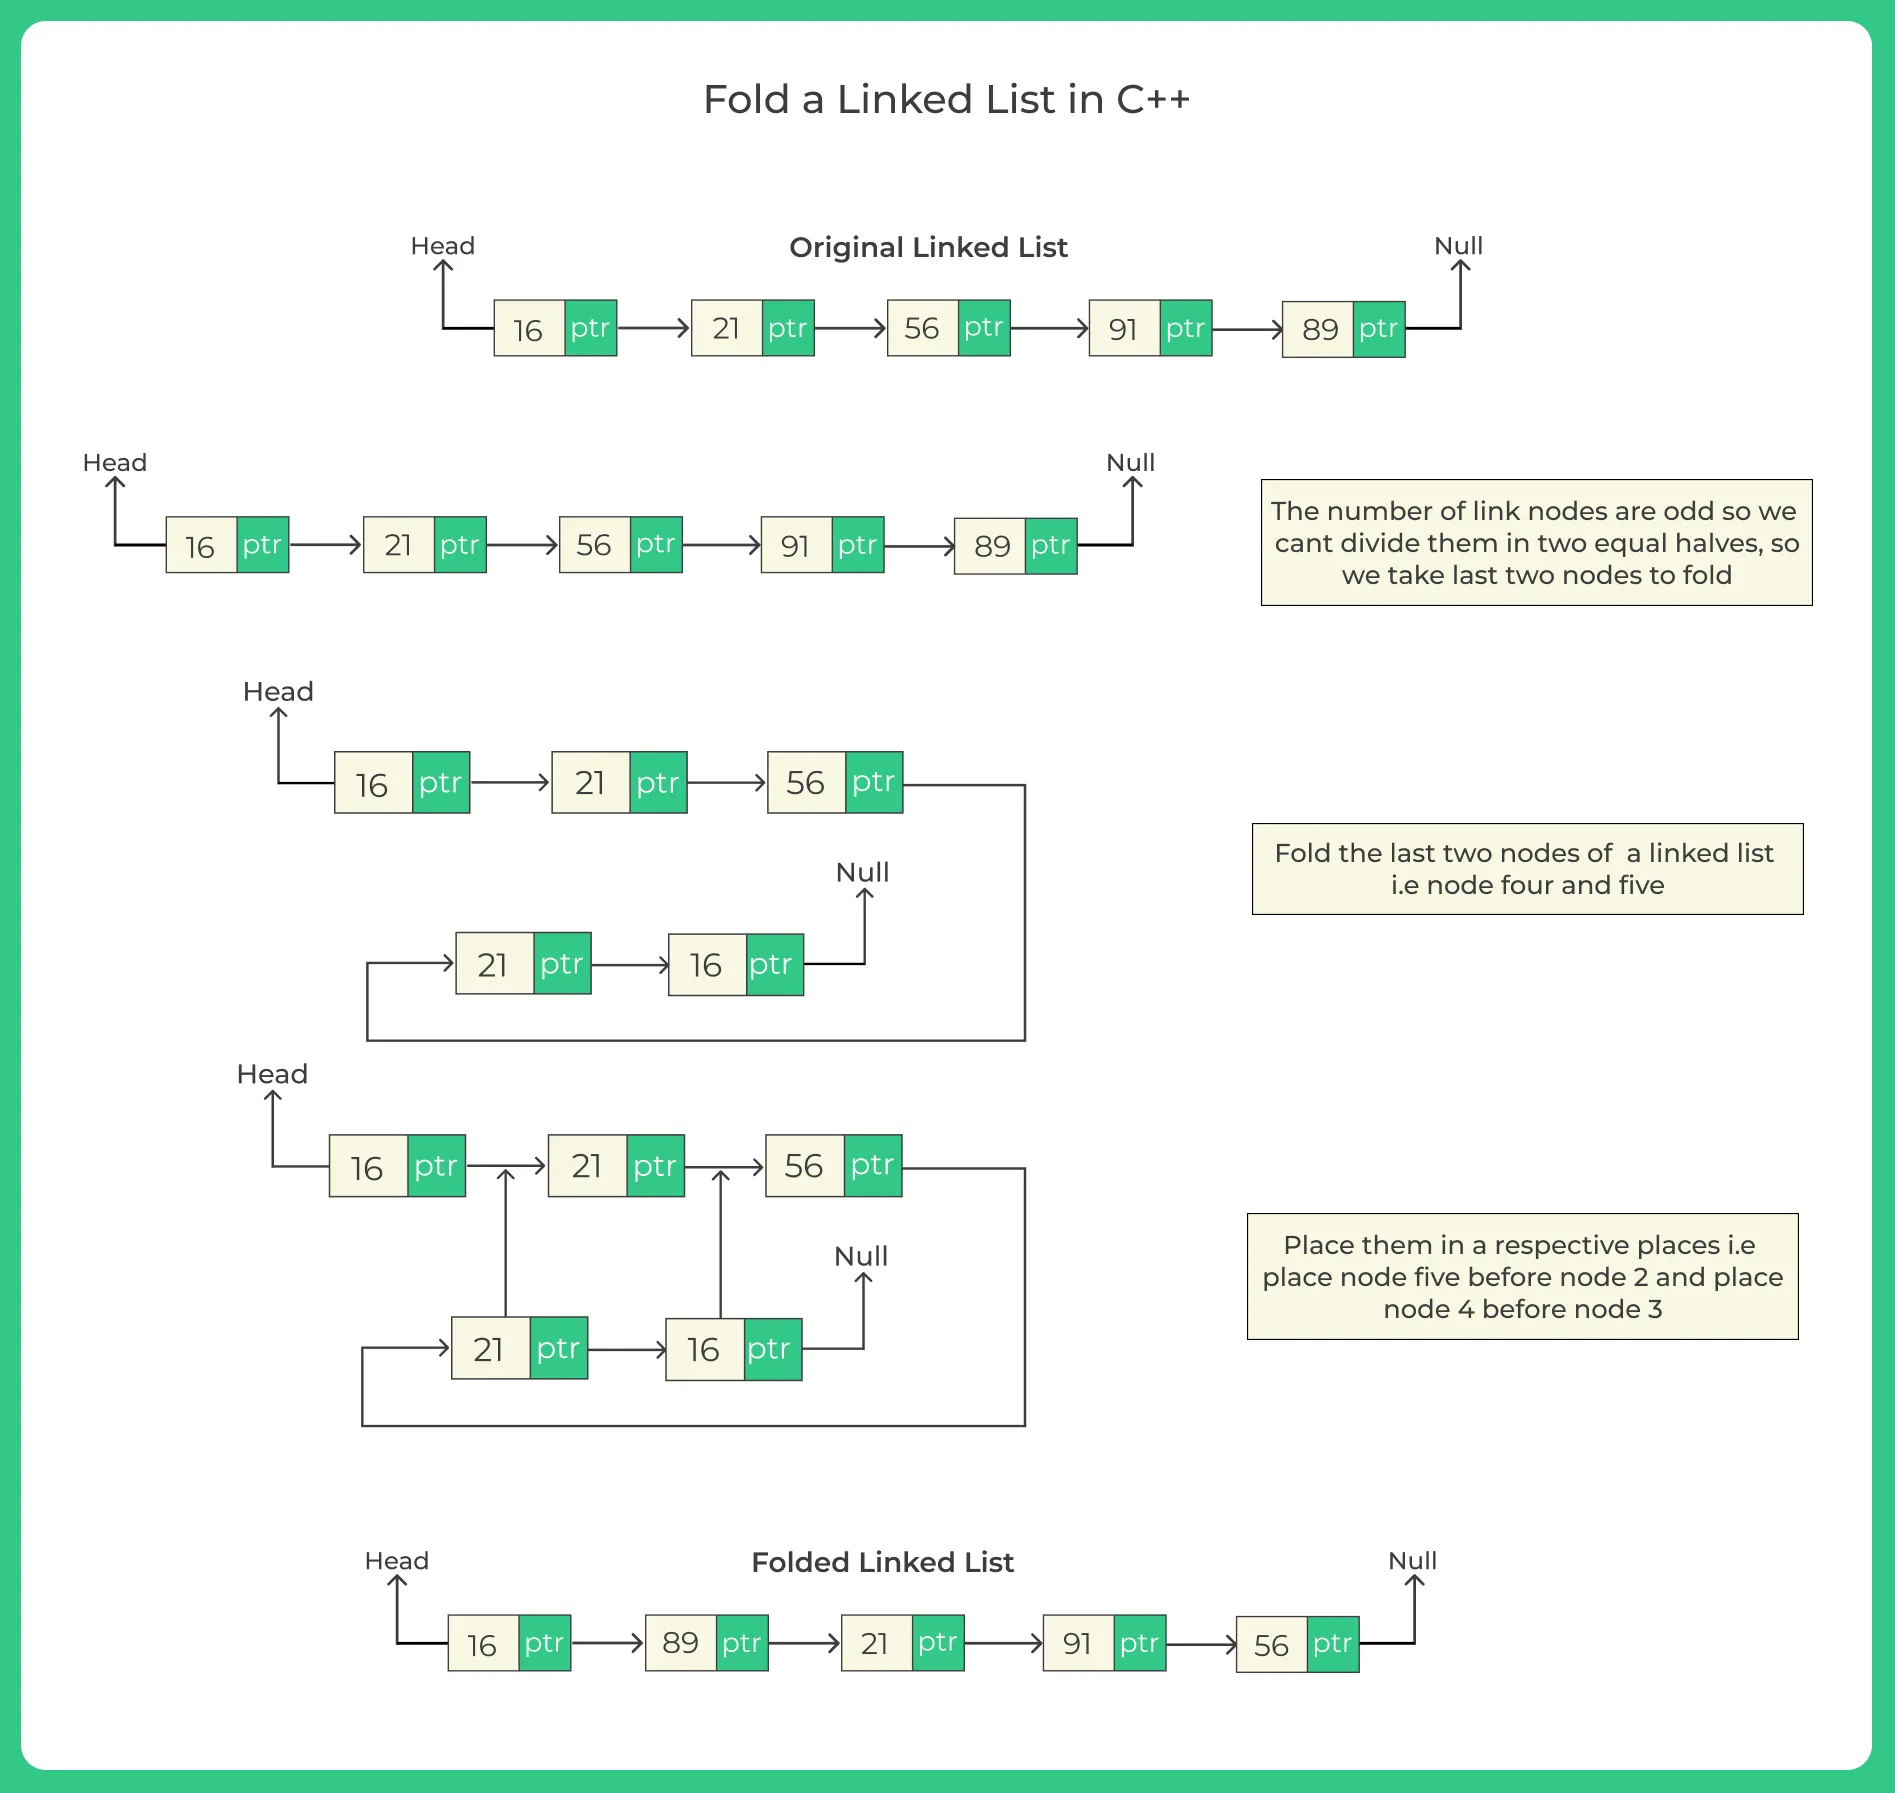 Fold a Linked List in C++